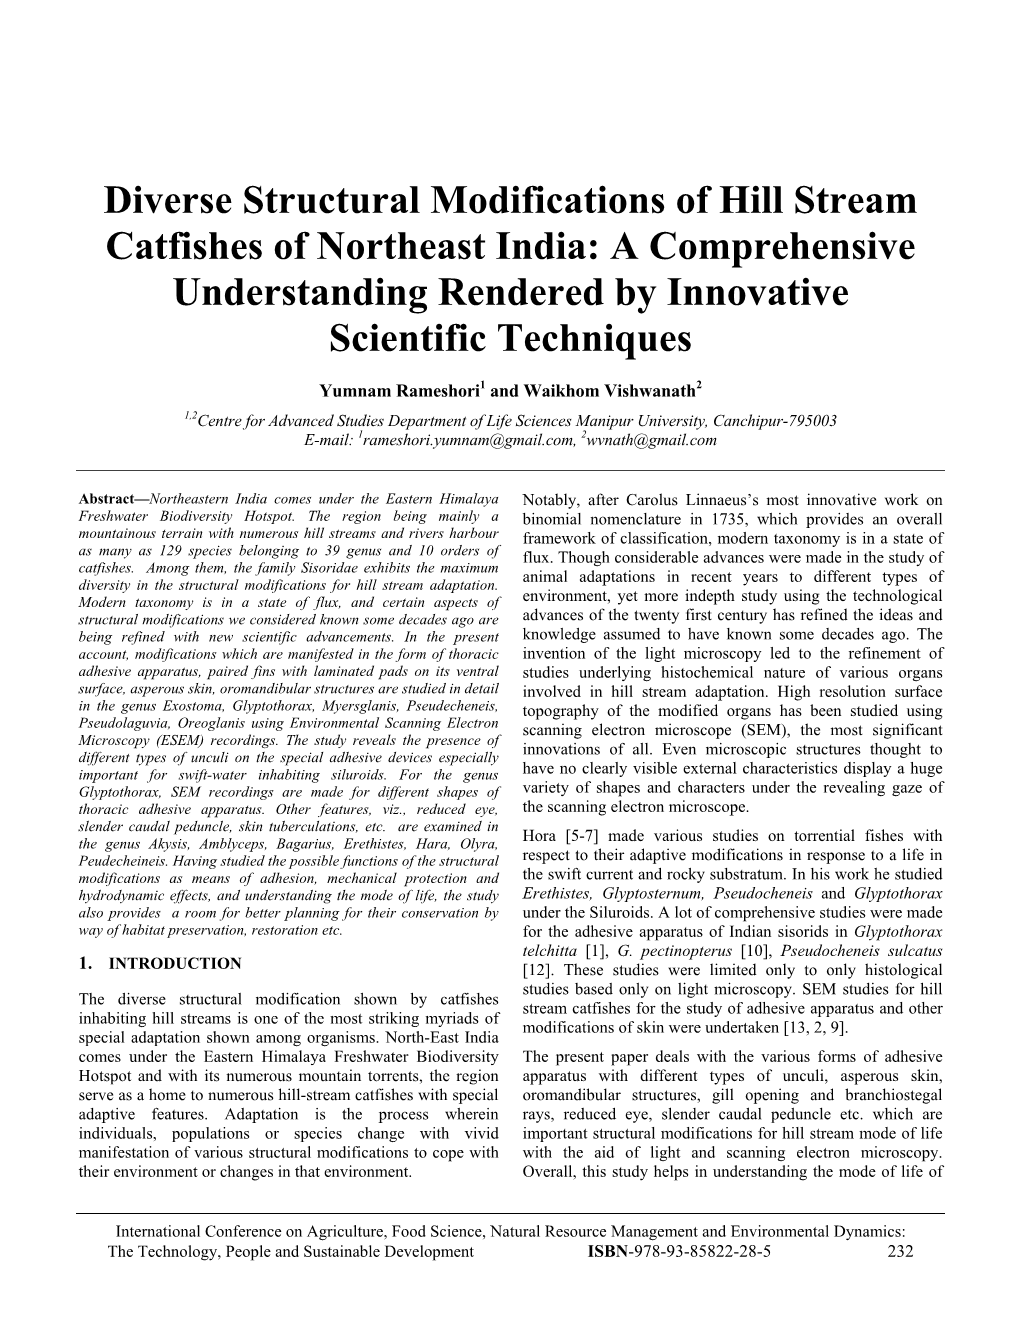 Diverse Structural Modifications of Hill Stream Catfishes of Northeast India: a Comprehensive Understanding Rendered by Innovative Scientific Techniques